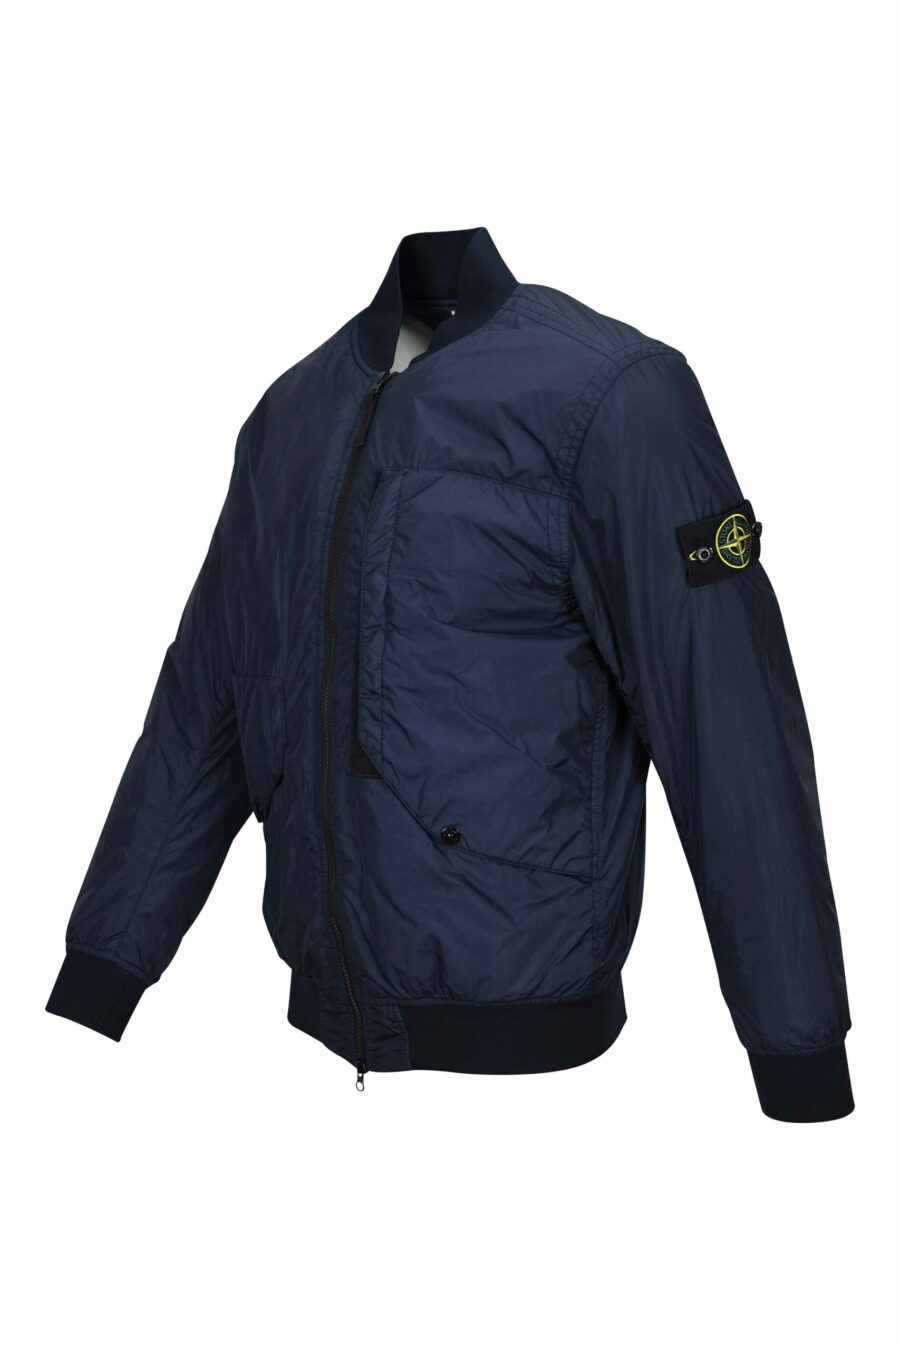 Blue jacket with logo side patch - 8052572762185 1 scaled